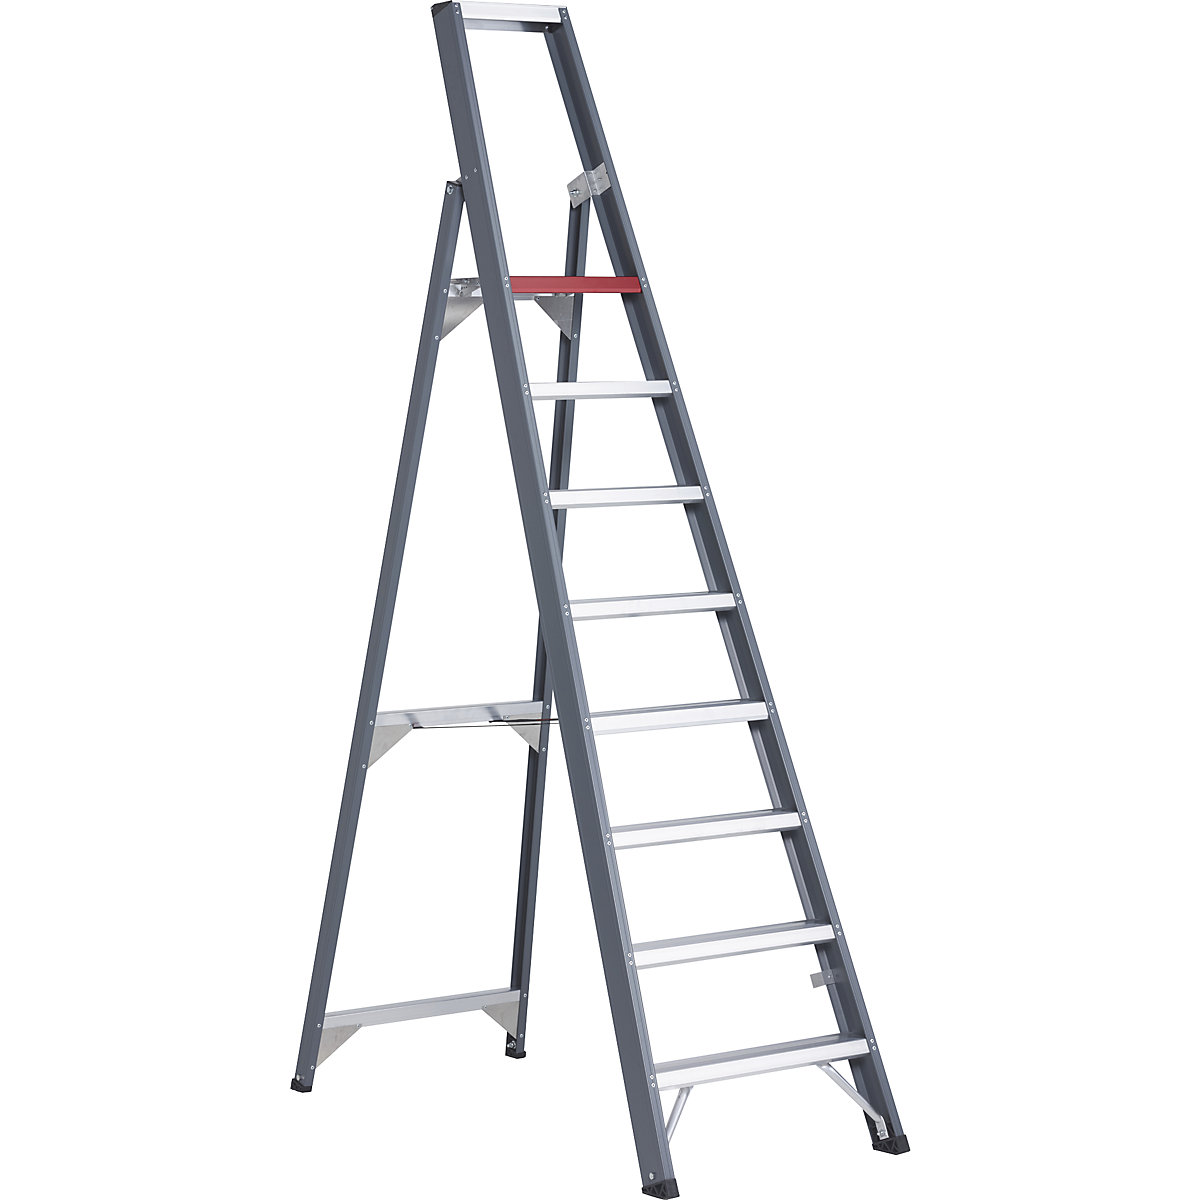 Aluminium step ladder, single sided access – Altrex, with storage tray, 8 steps, working height 3900 mm-6